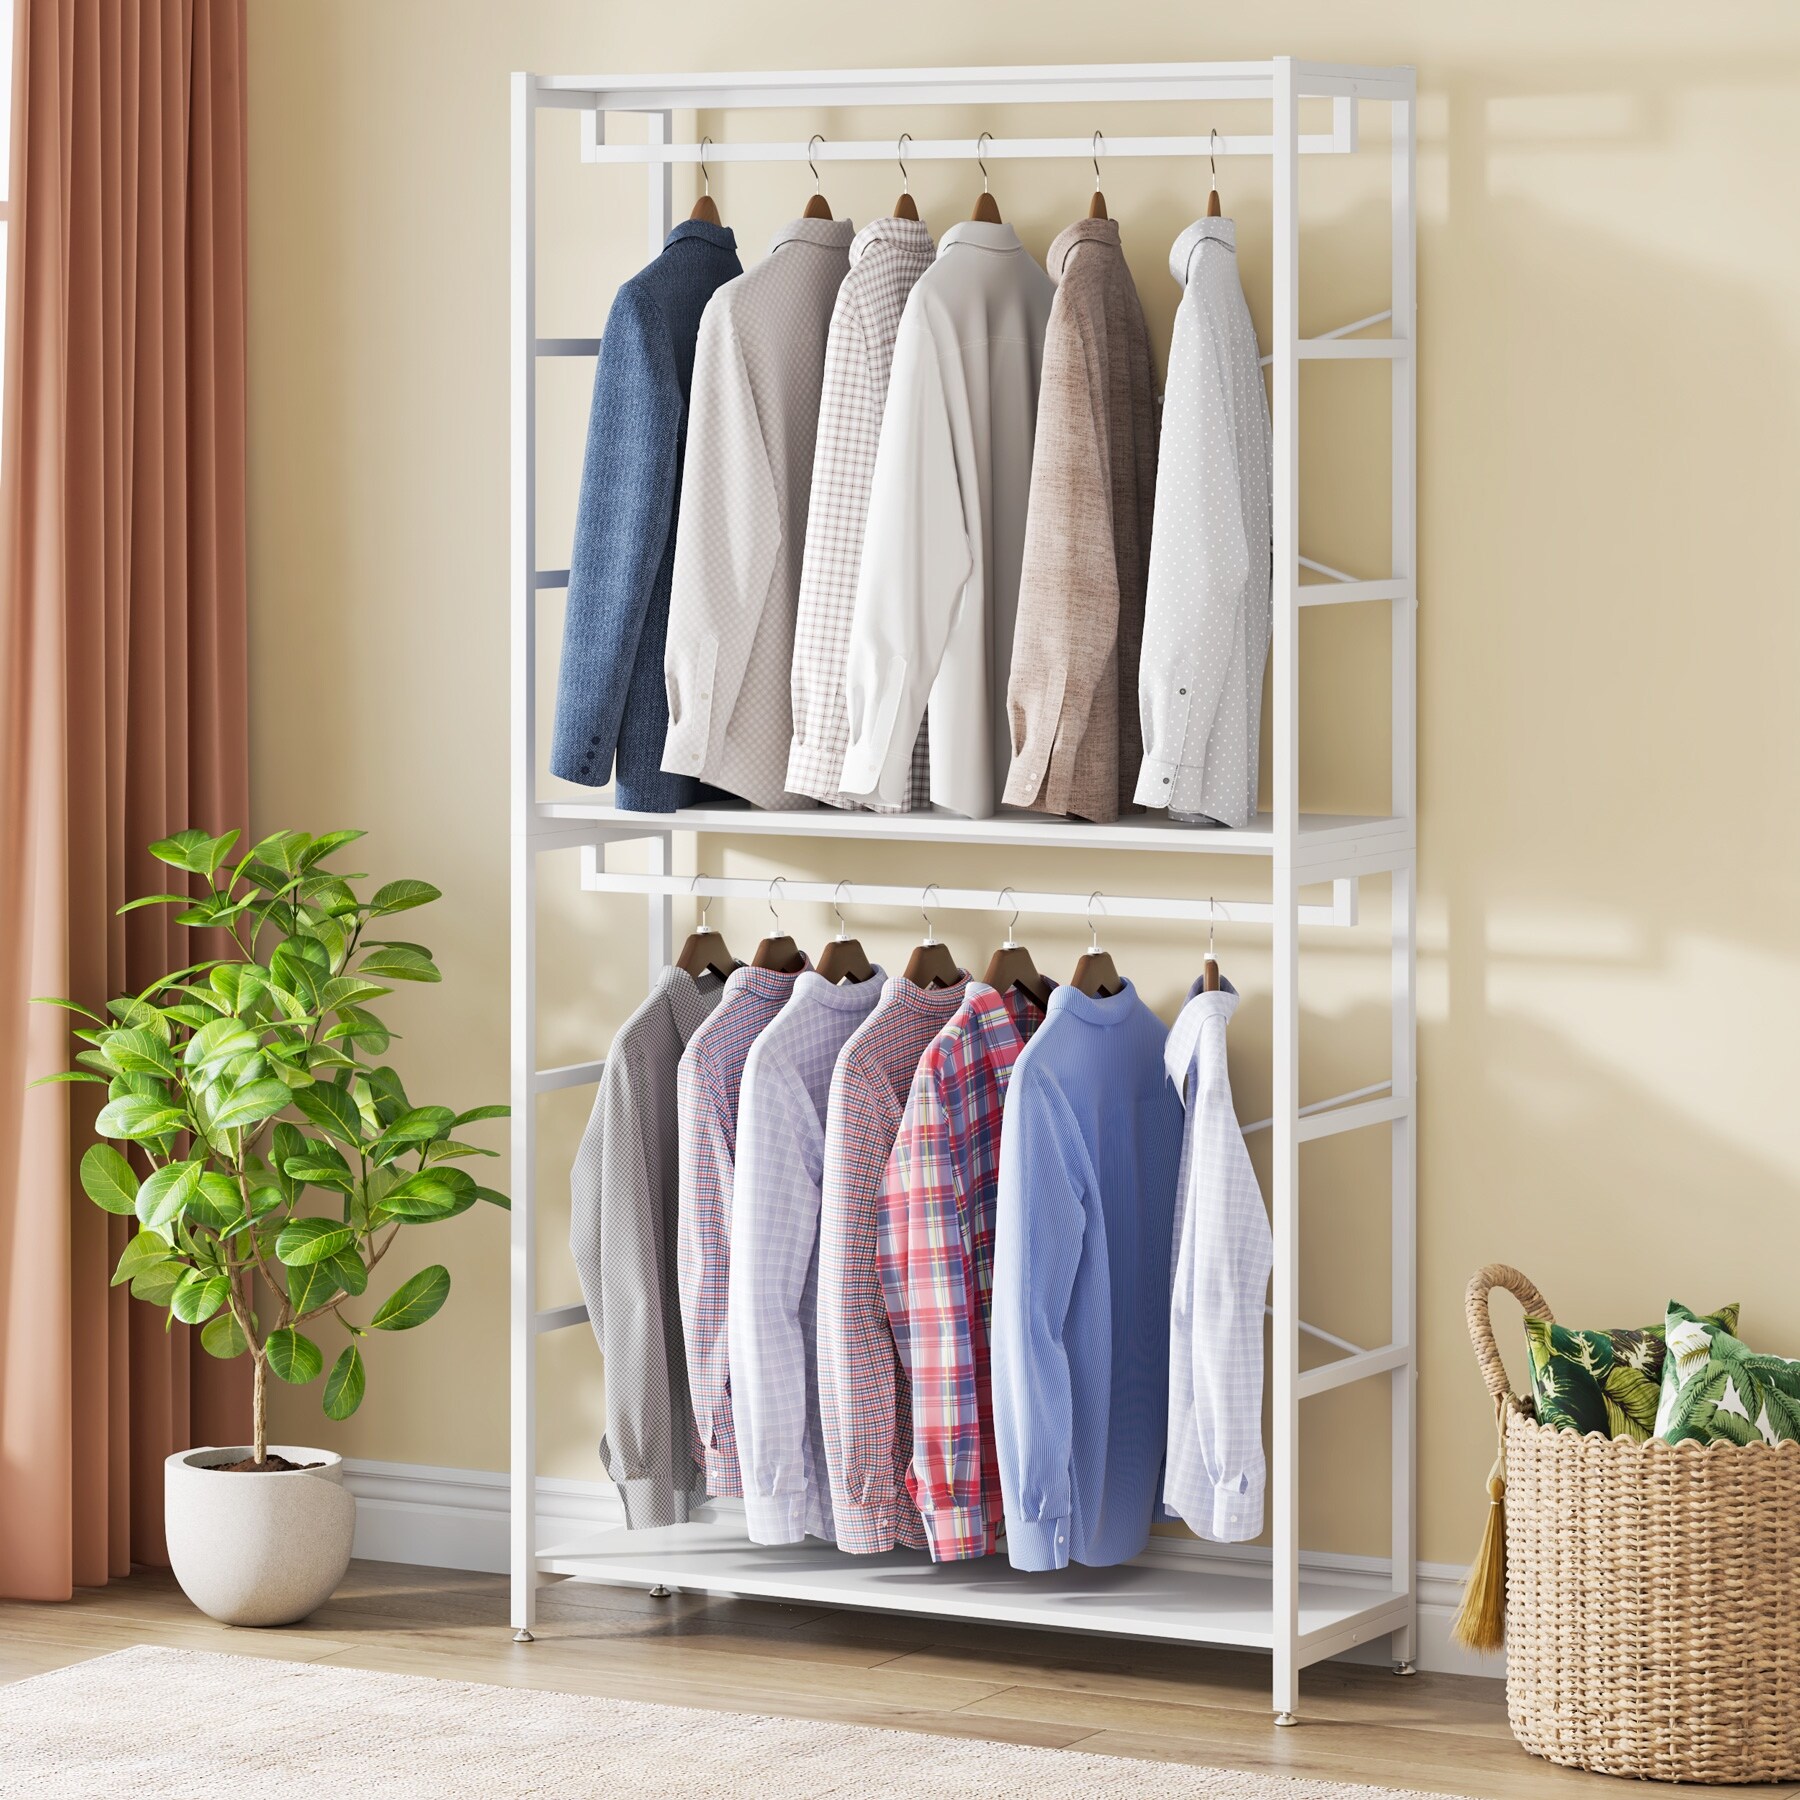 https://ak1.ostkcdn.com/images/products/is/images/direct/5262c22e036e5eac8ac2764efd9bb1bdf5058f7d/Free-standing-Closet-Organizer-with-3-Shelves-and-2-Hanging-Rod.jpg